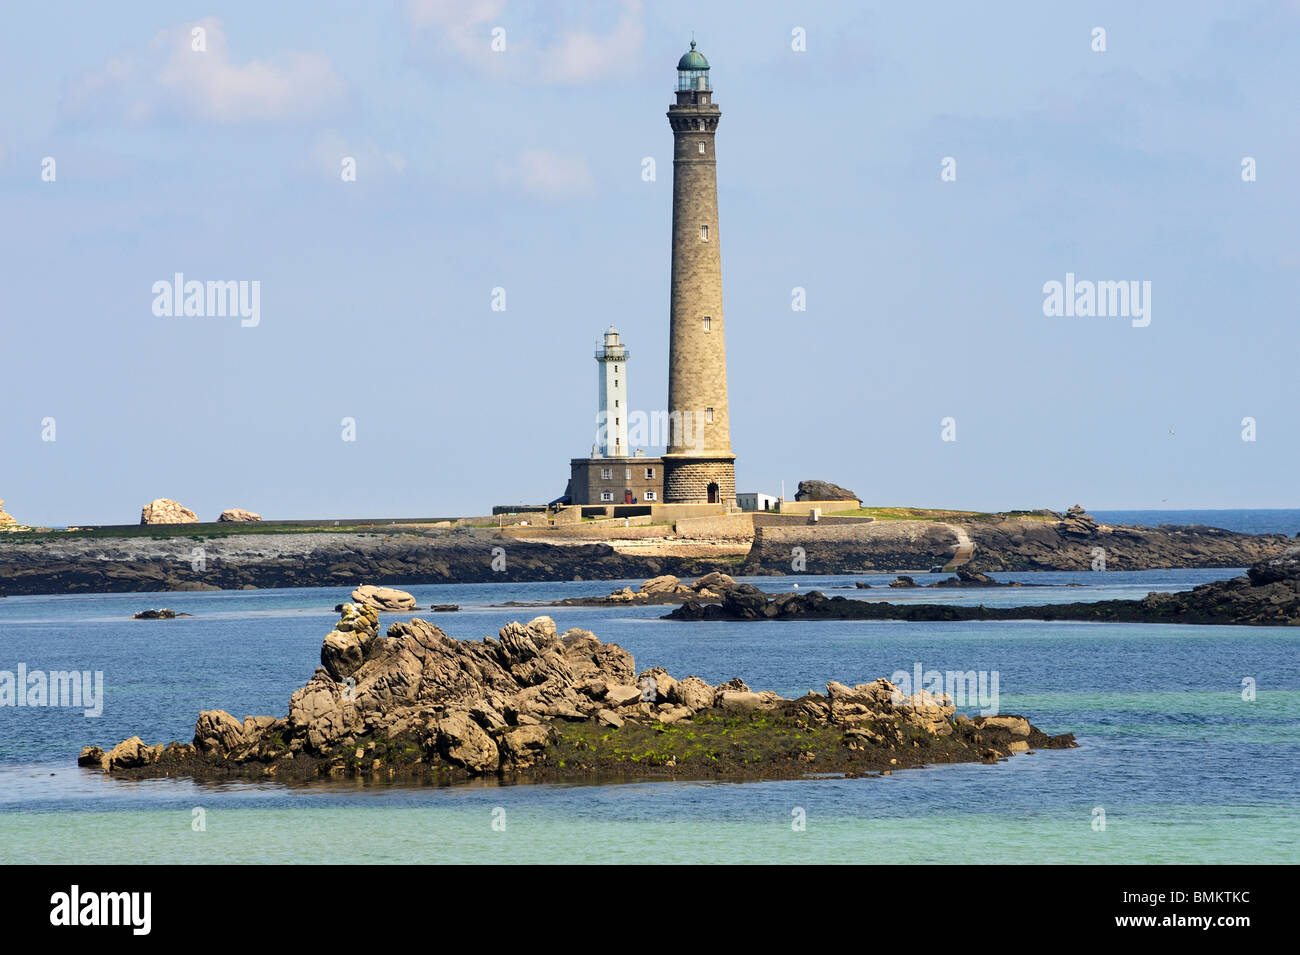 Lighthouses, Phare de l'ile Vierge, off St Michel, Brittany, France Stock Photo